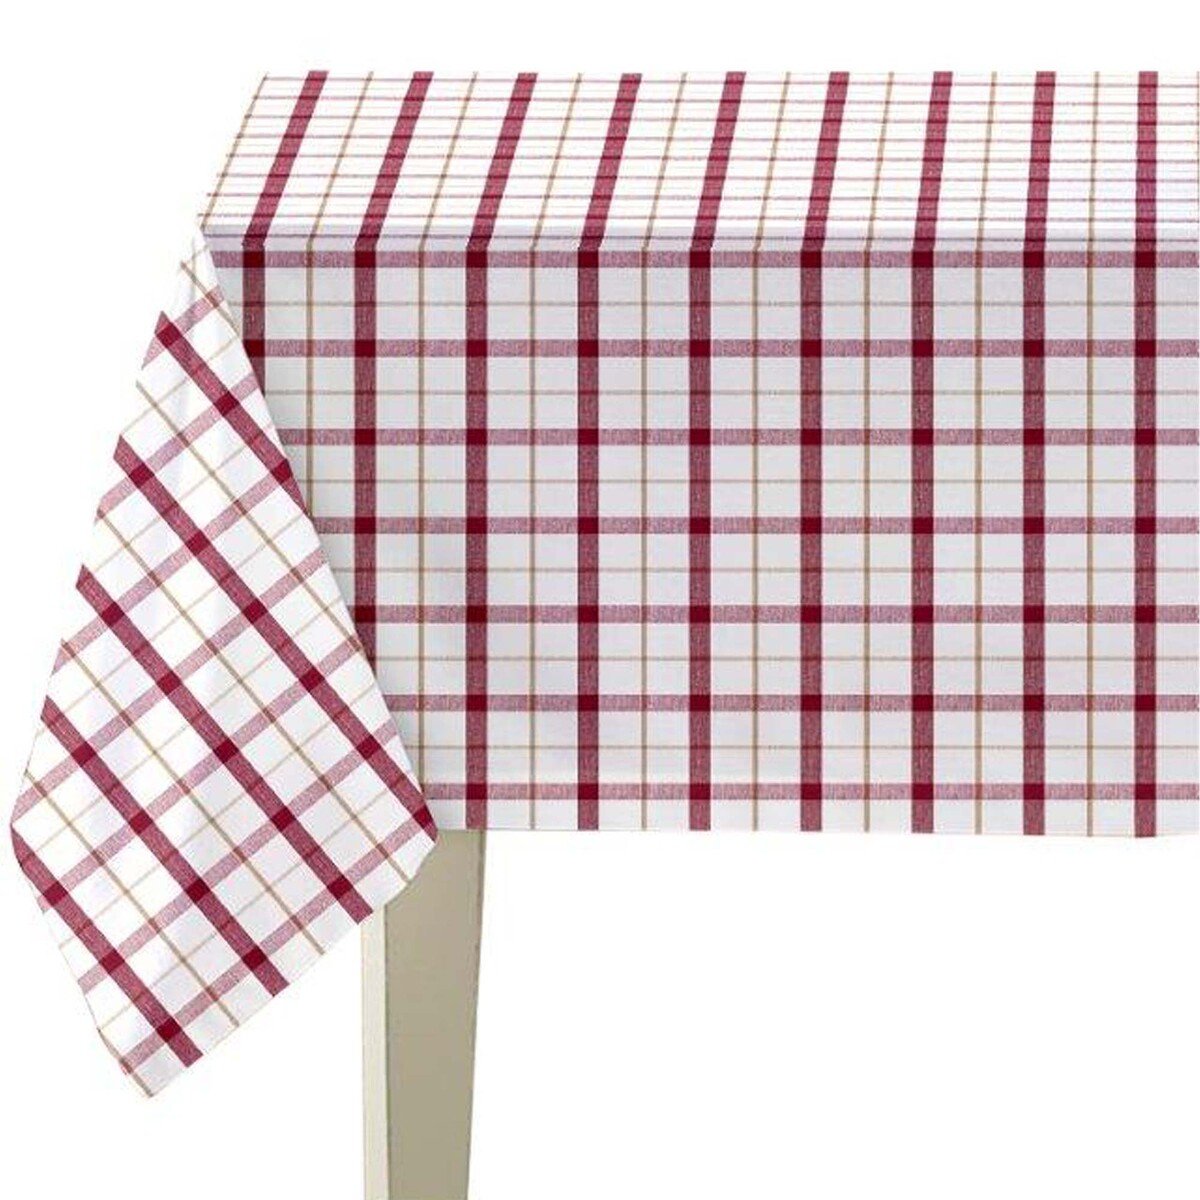 Homewell Table Cloth Cotton 150x225cm PN22 Assorted